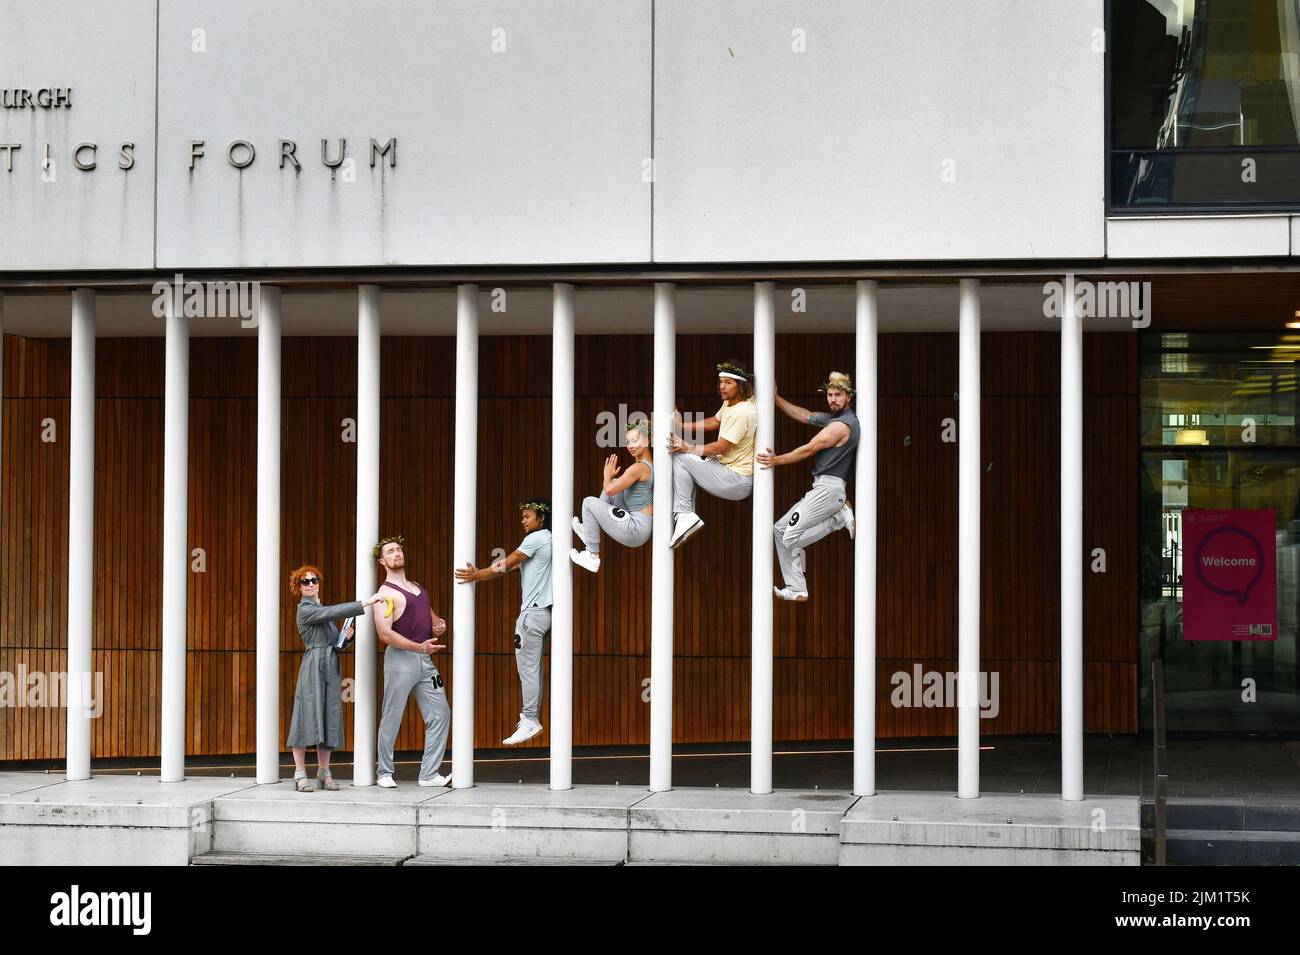 Edinburgh Scotland, UK 04 August 2022. Barely Methodical Troupe KIN, photocall at School of Informatics which mirrors the plinths seen in the stage show. credit sst/alamy live news Stock Photo